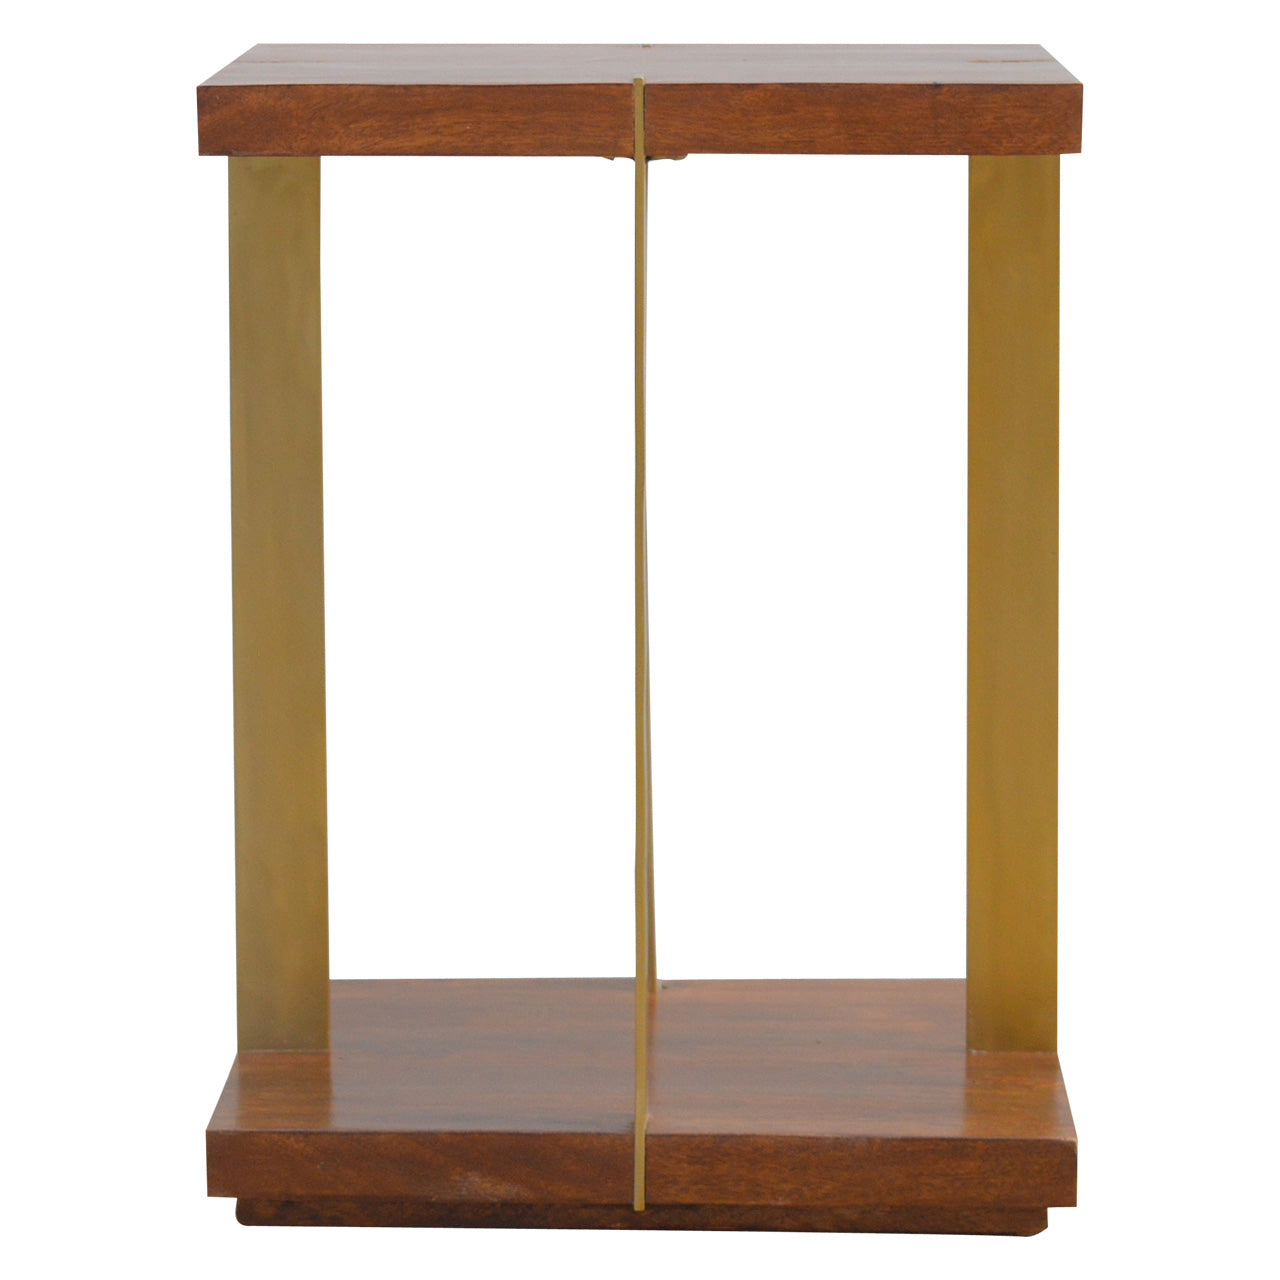 View Open Panel Chestnut End Table information